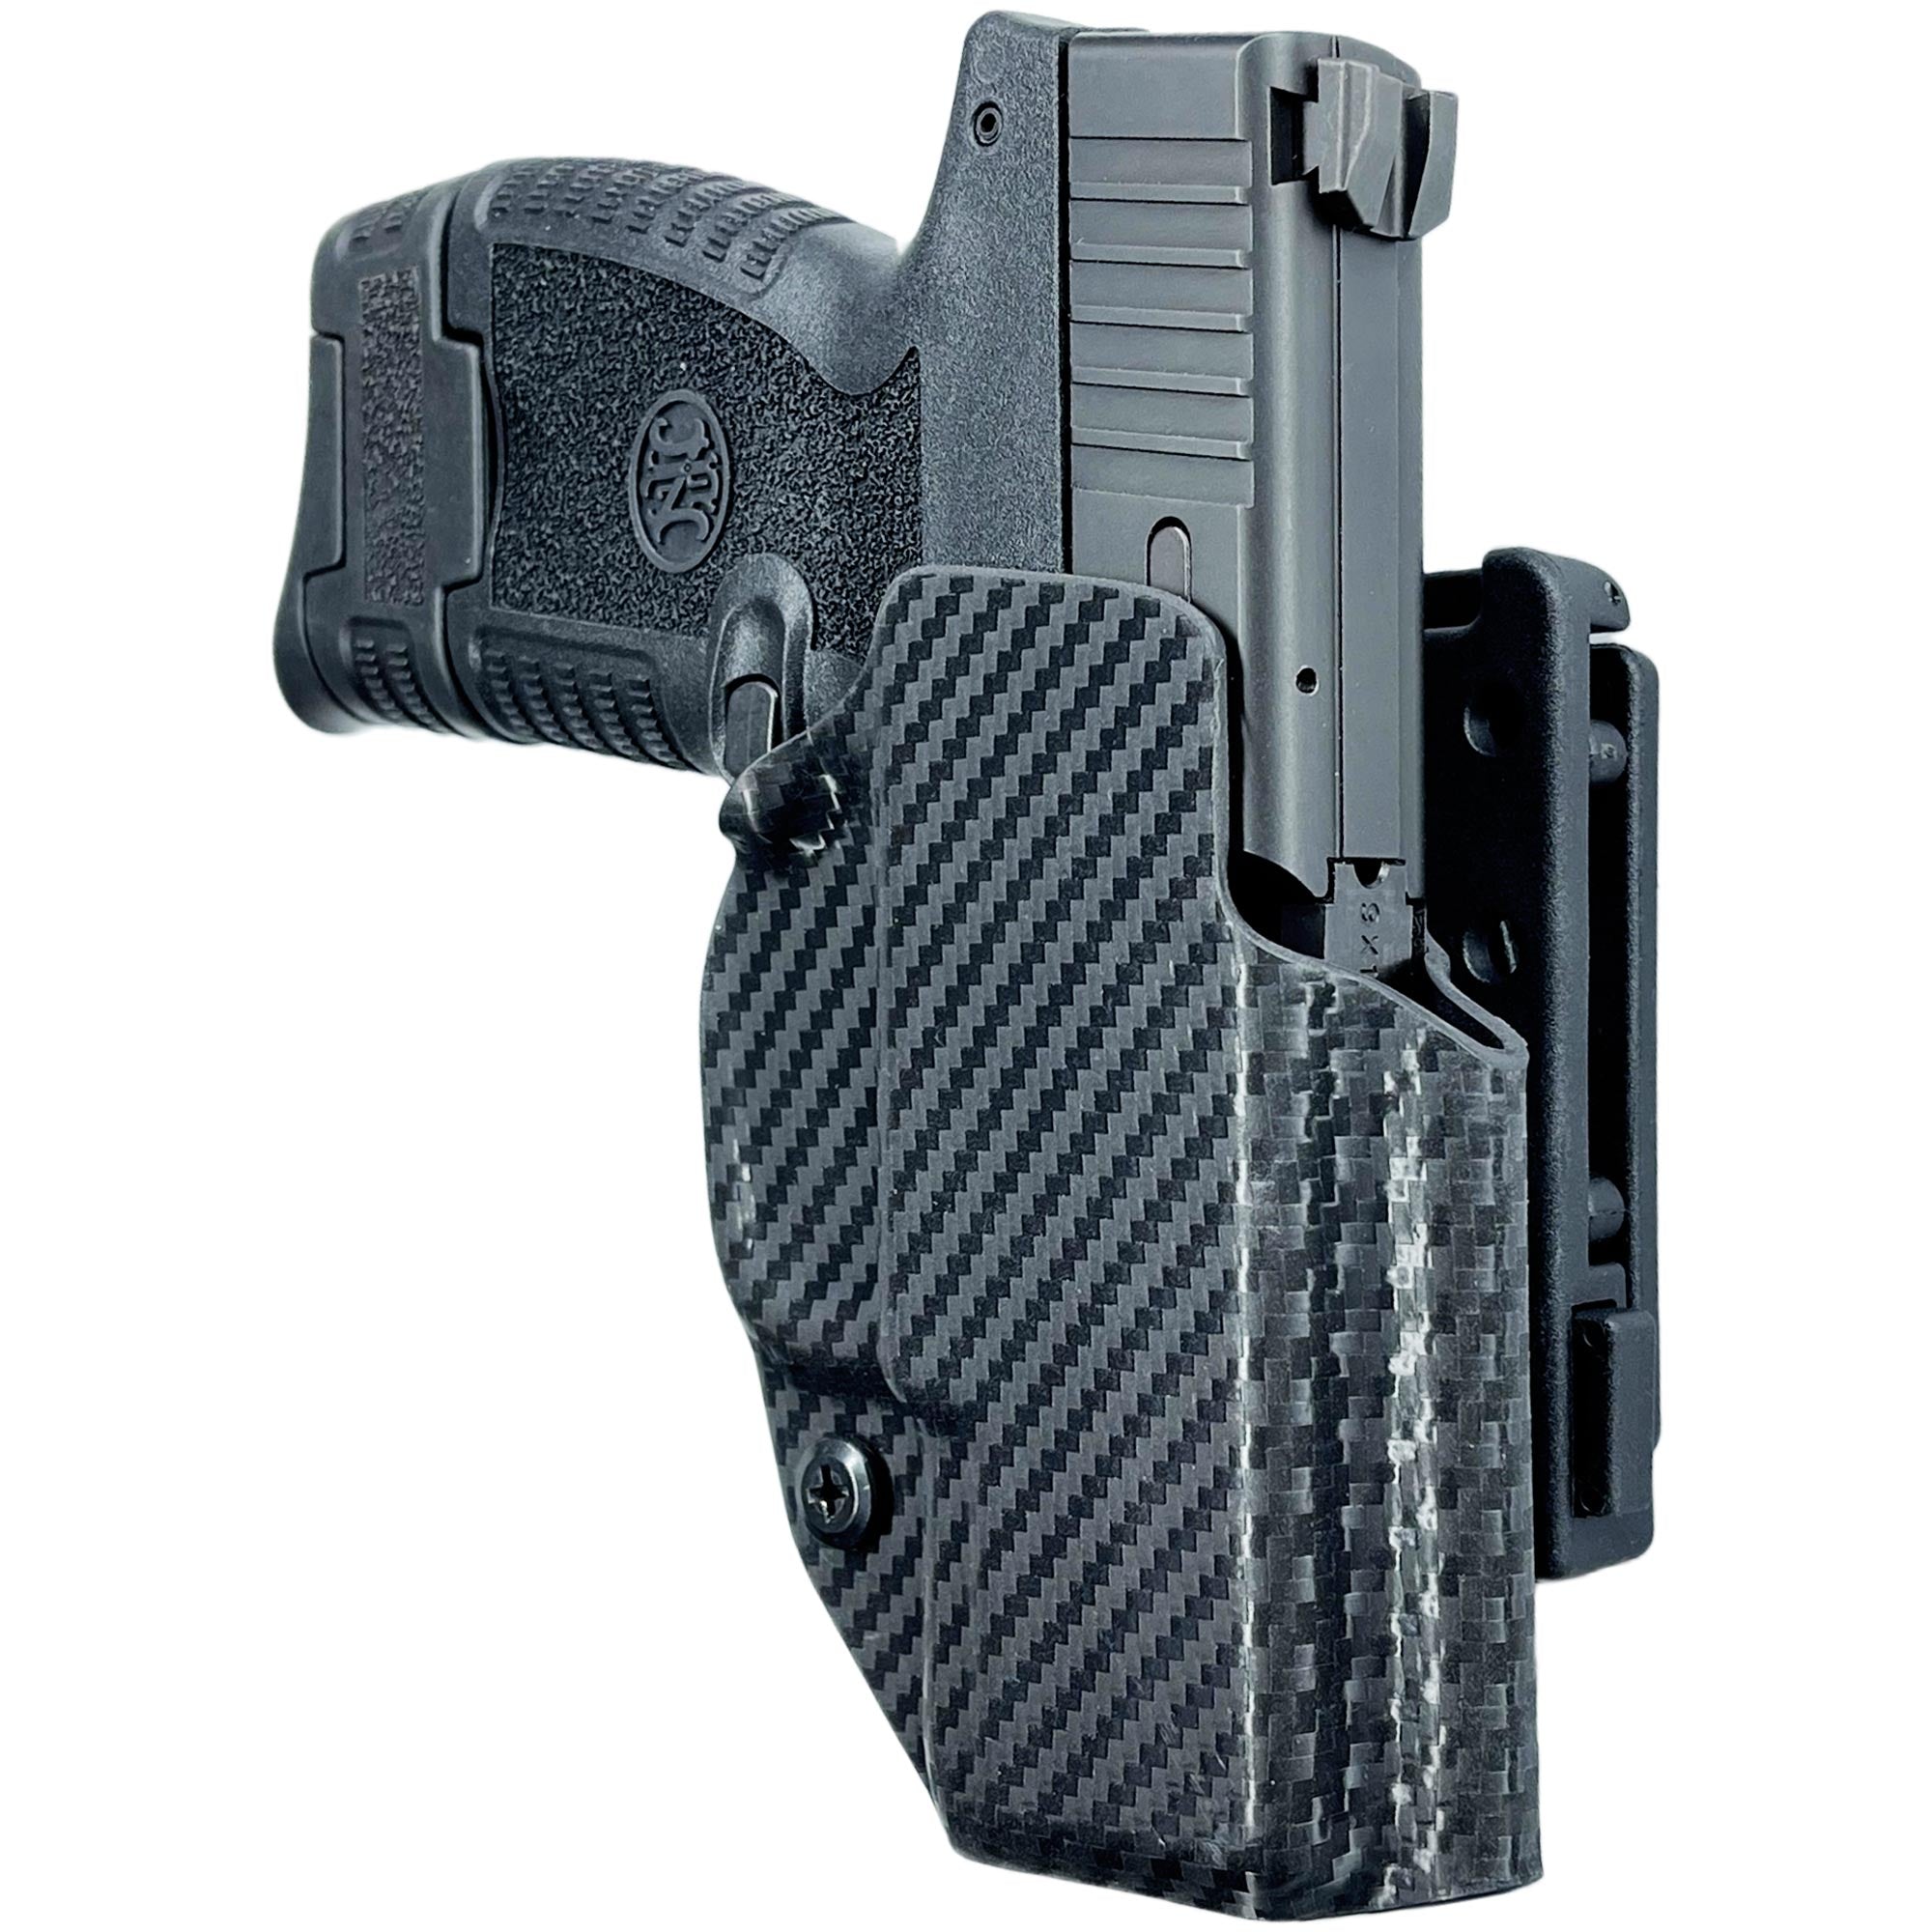 Pro IDPA Competition Holster for FN 503 - Carbon Fiber 1